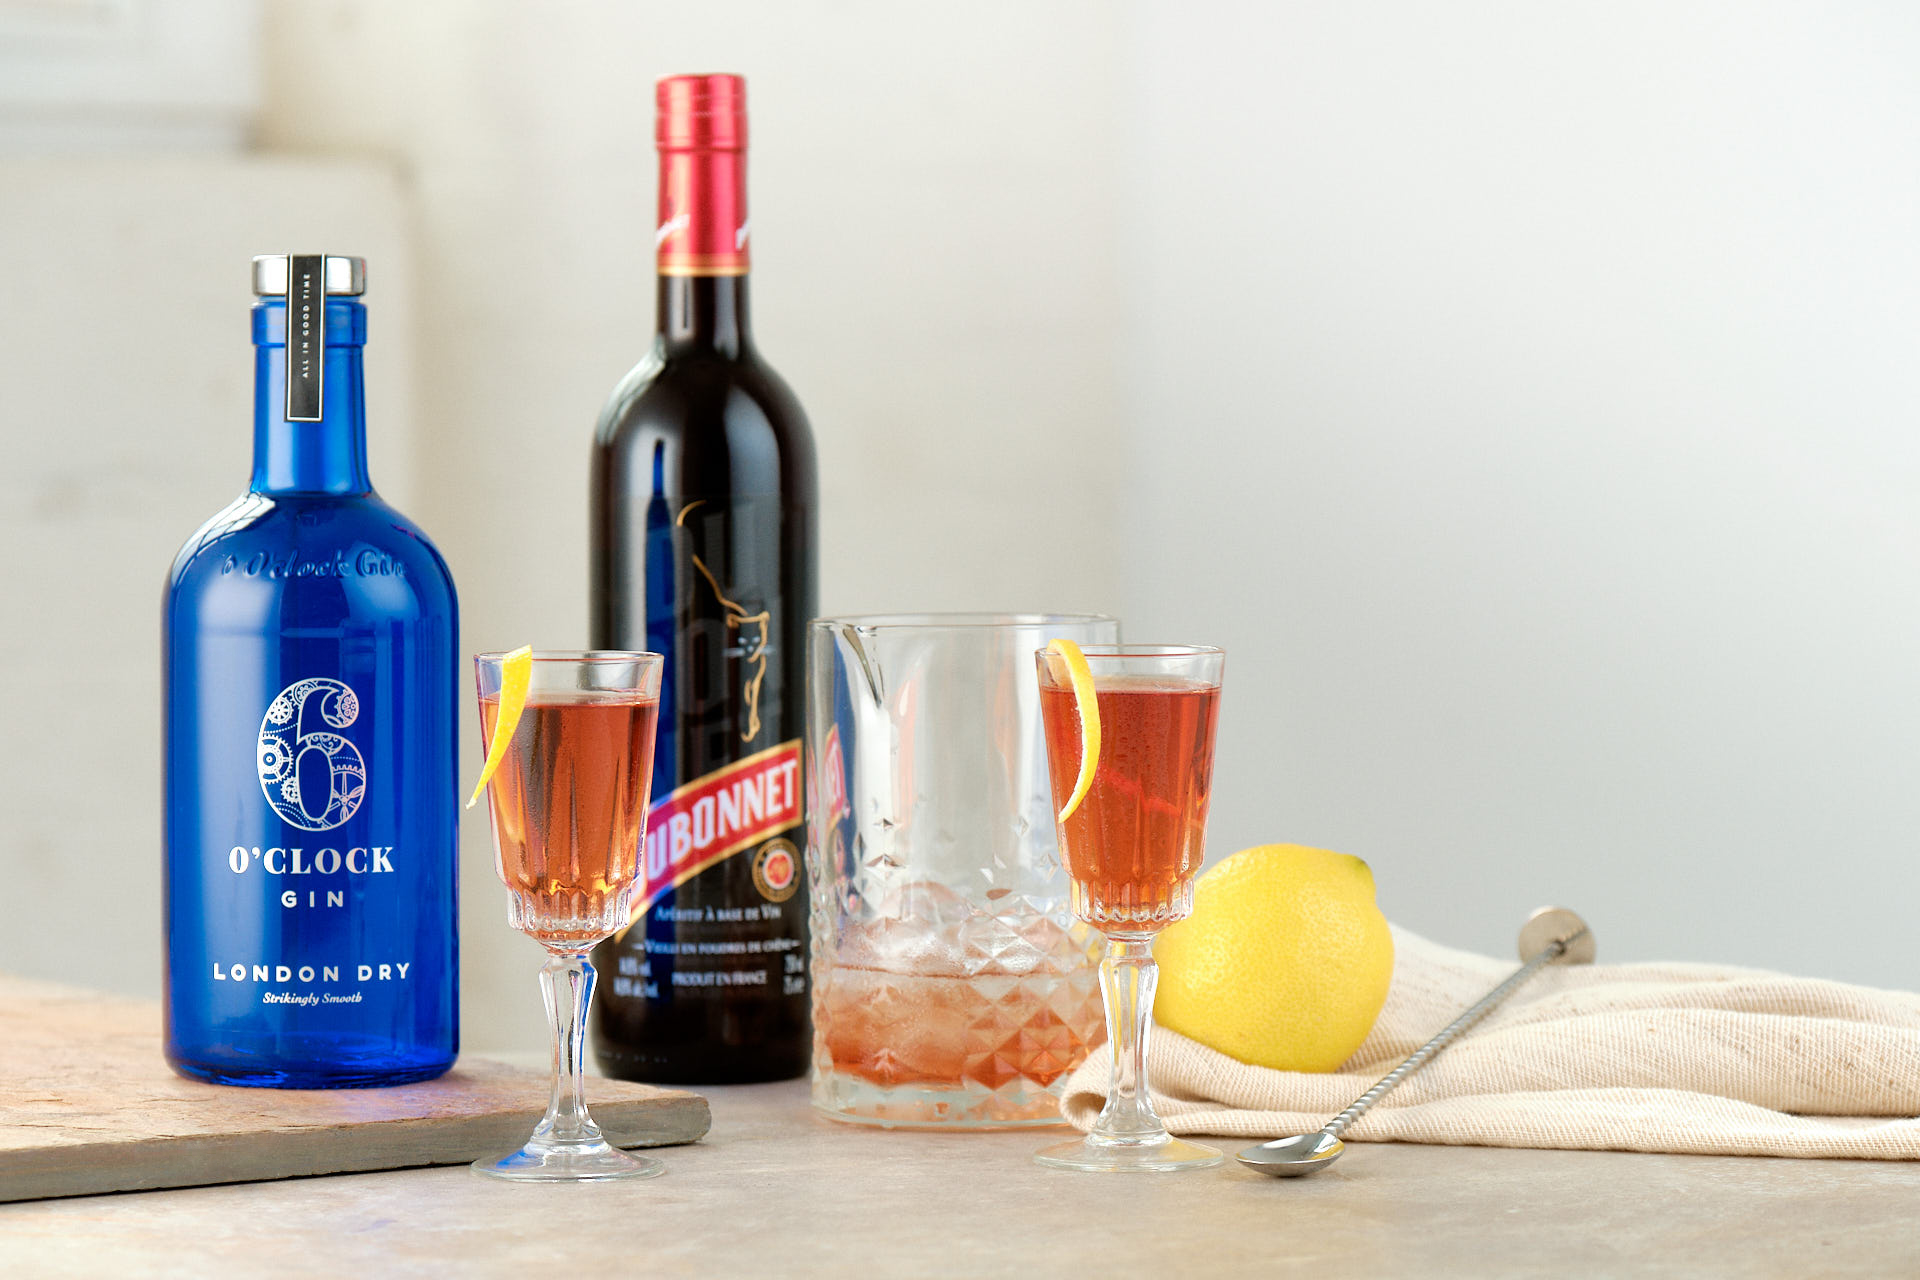 Dubonet & Gin Cocktail - How to drink like a Royal and celebrate the platinum Jubilee with some delicious gin cocktails.